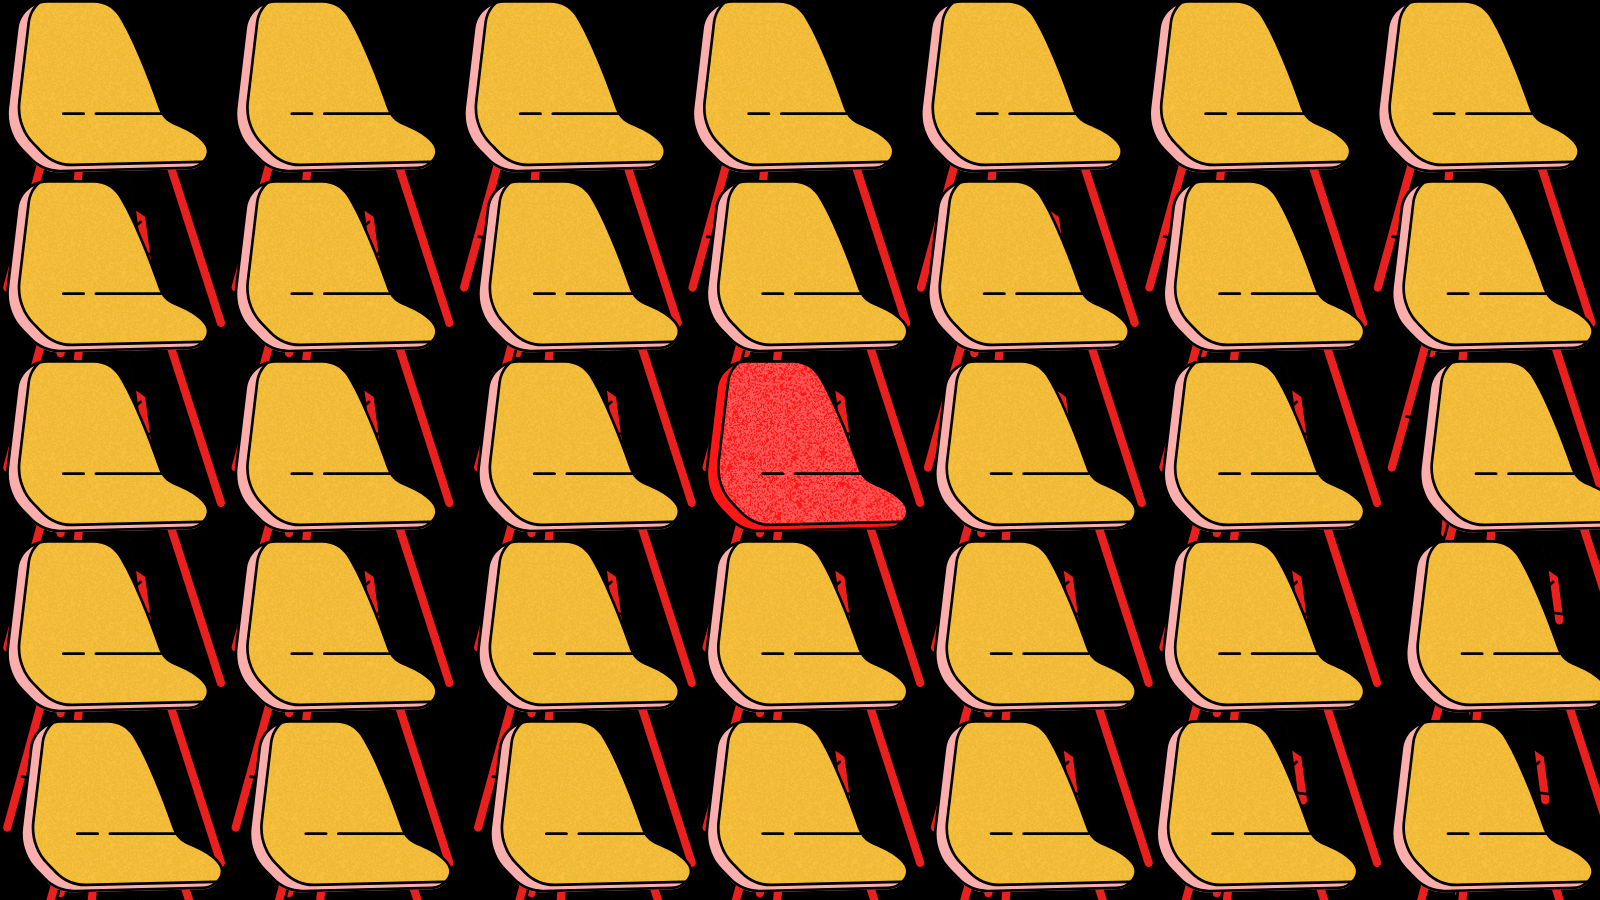 Rows of yellow chairs with one red chair